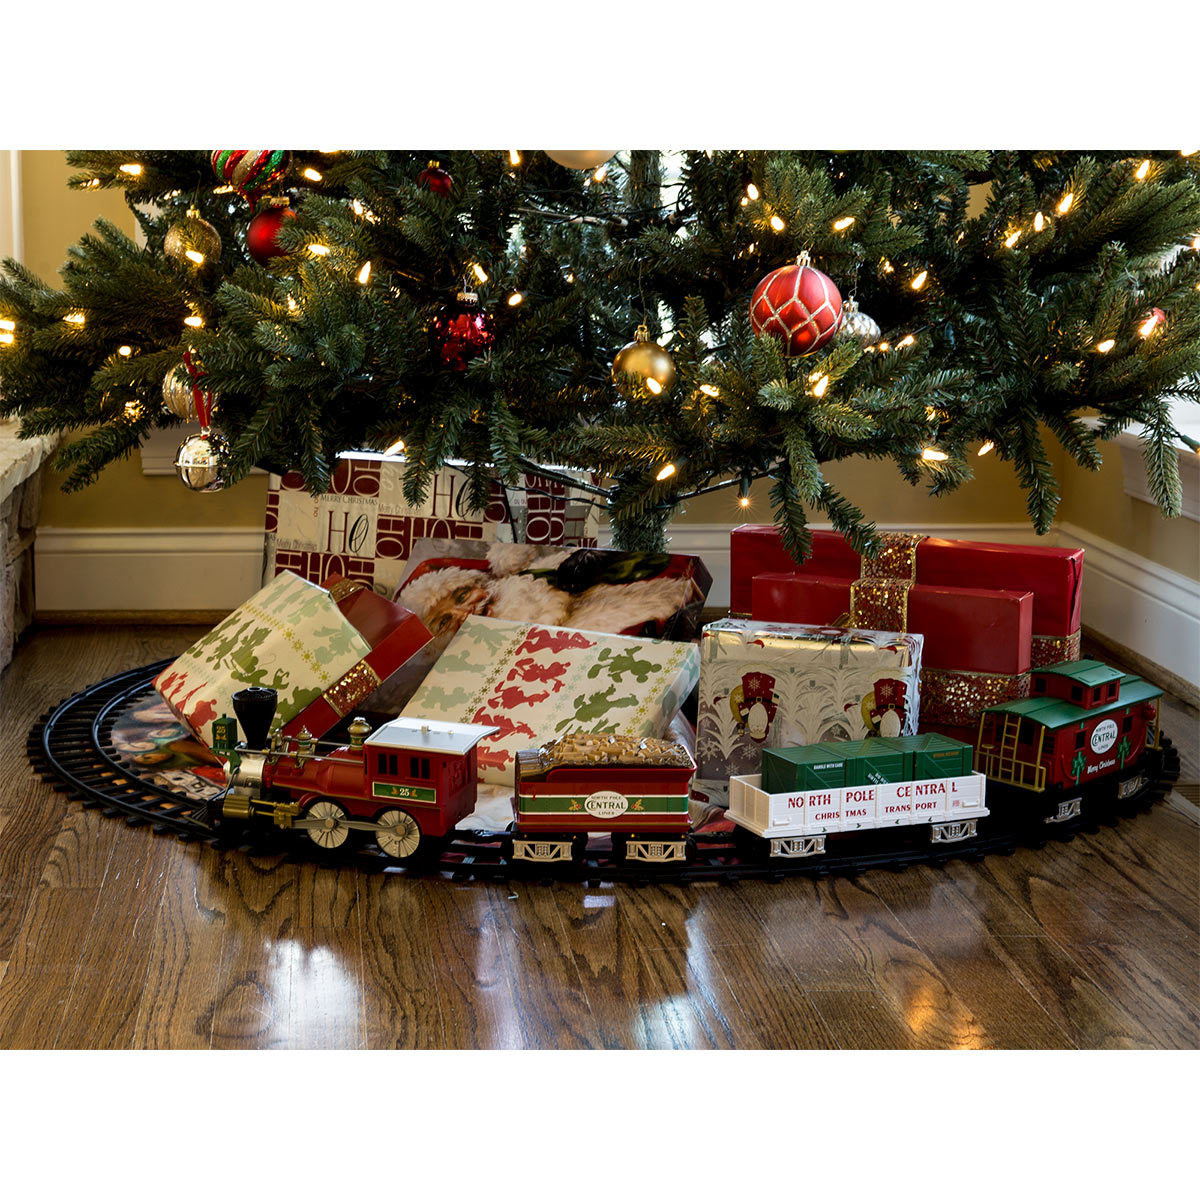 christmas tree with a train in it